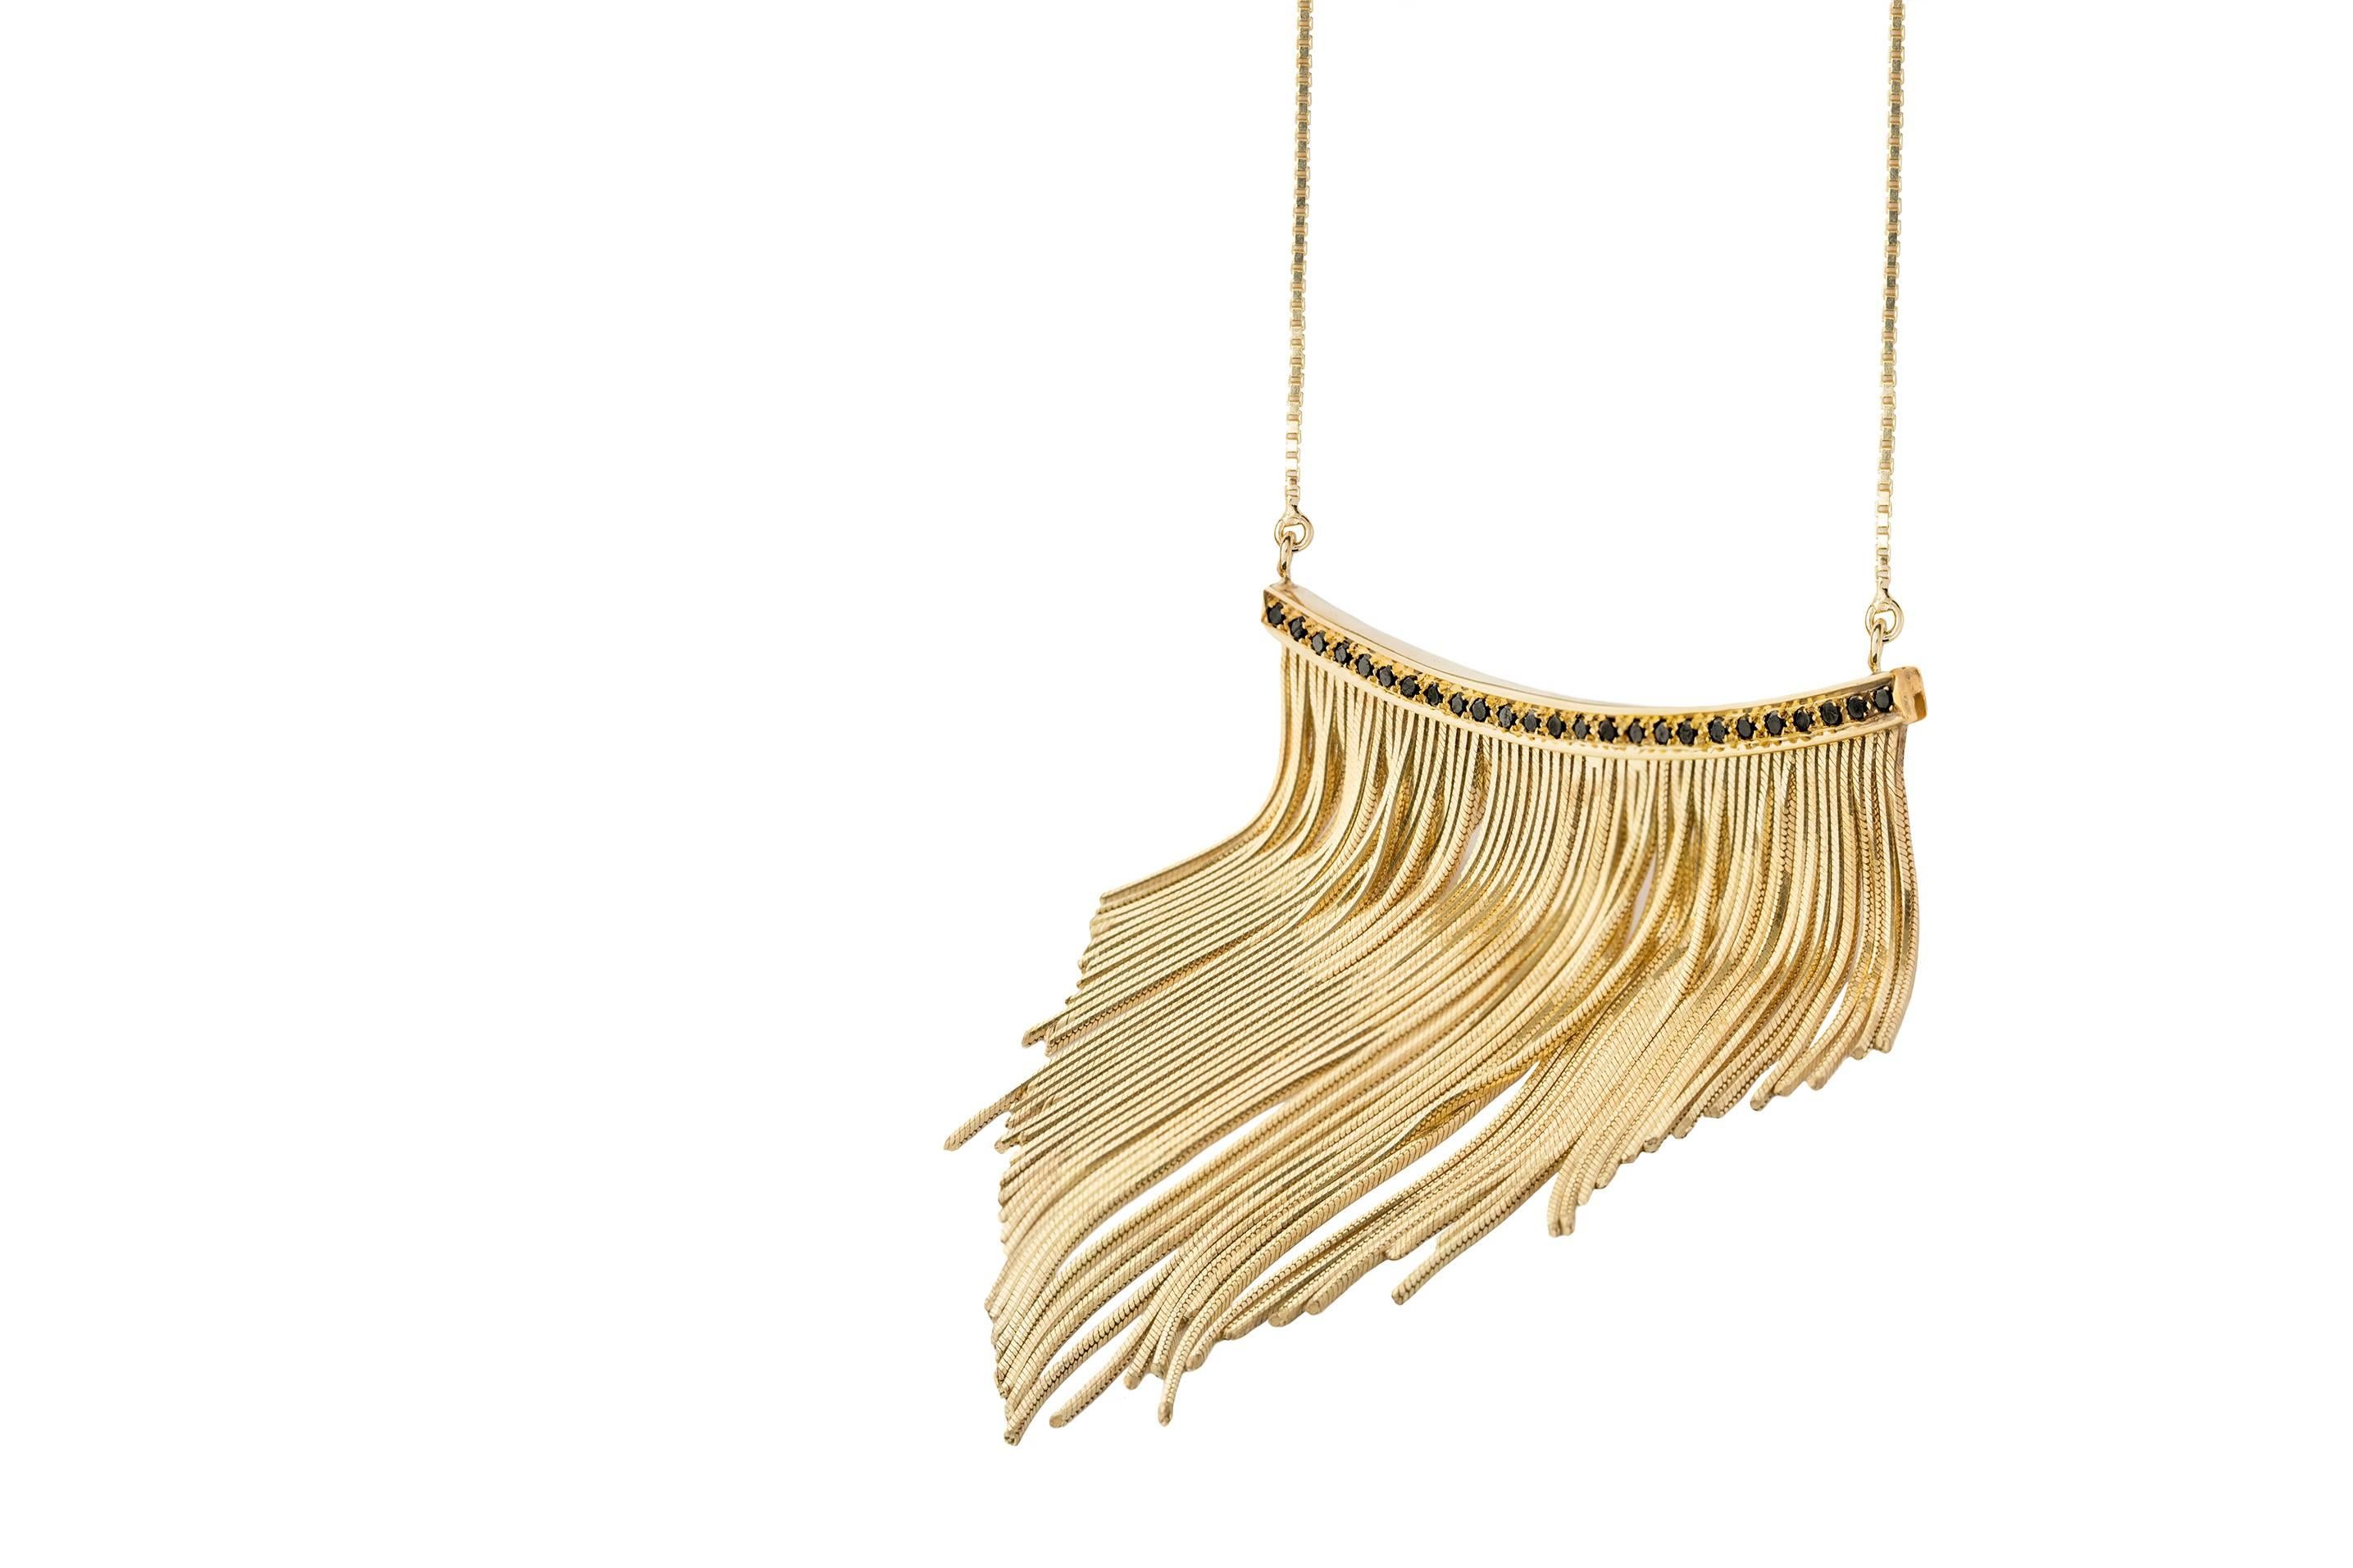 The traditional elegance of gold is given a modern feminine interpretation in this statement fringed necklace from Iosselliani. Wisely crafted with a 18 Karat yellow solid gold custom made chain, the necklace features a central with 0,58 carats